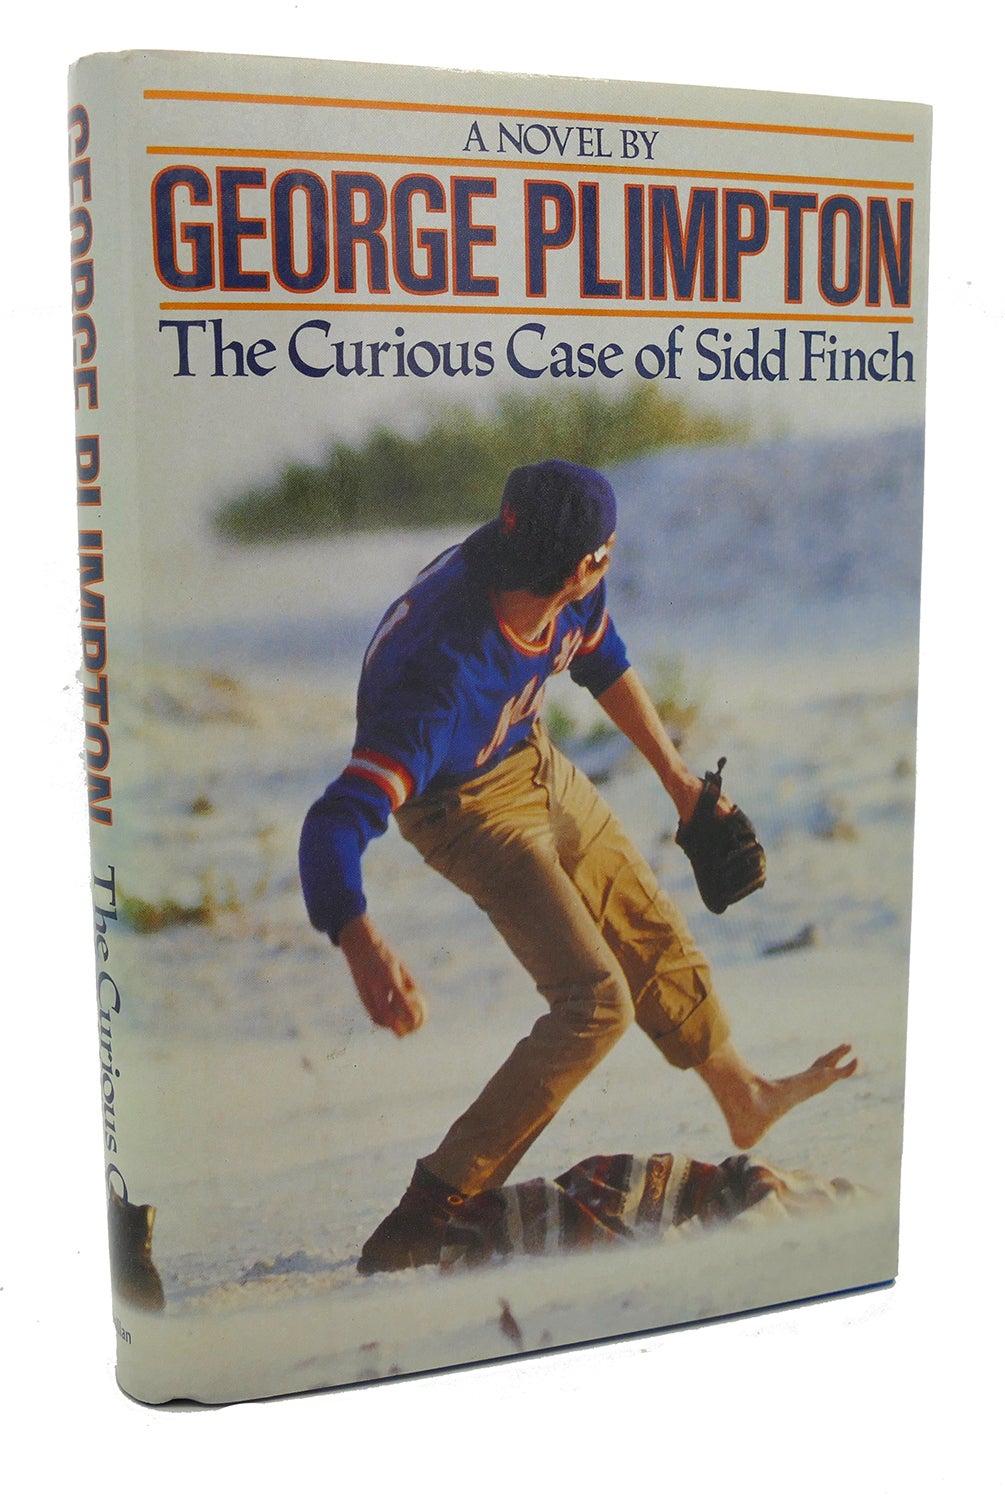 THE CURIOUS CASE OF SIDD FINCH, George Plimpton